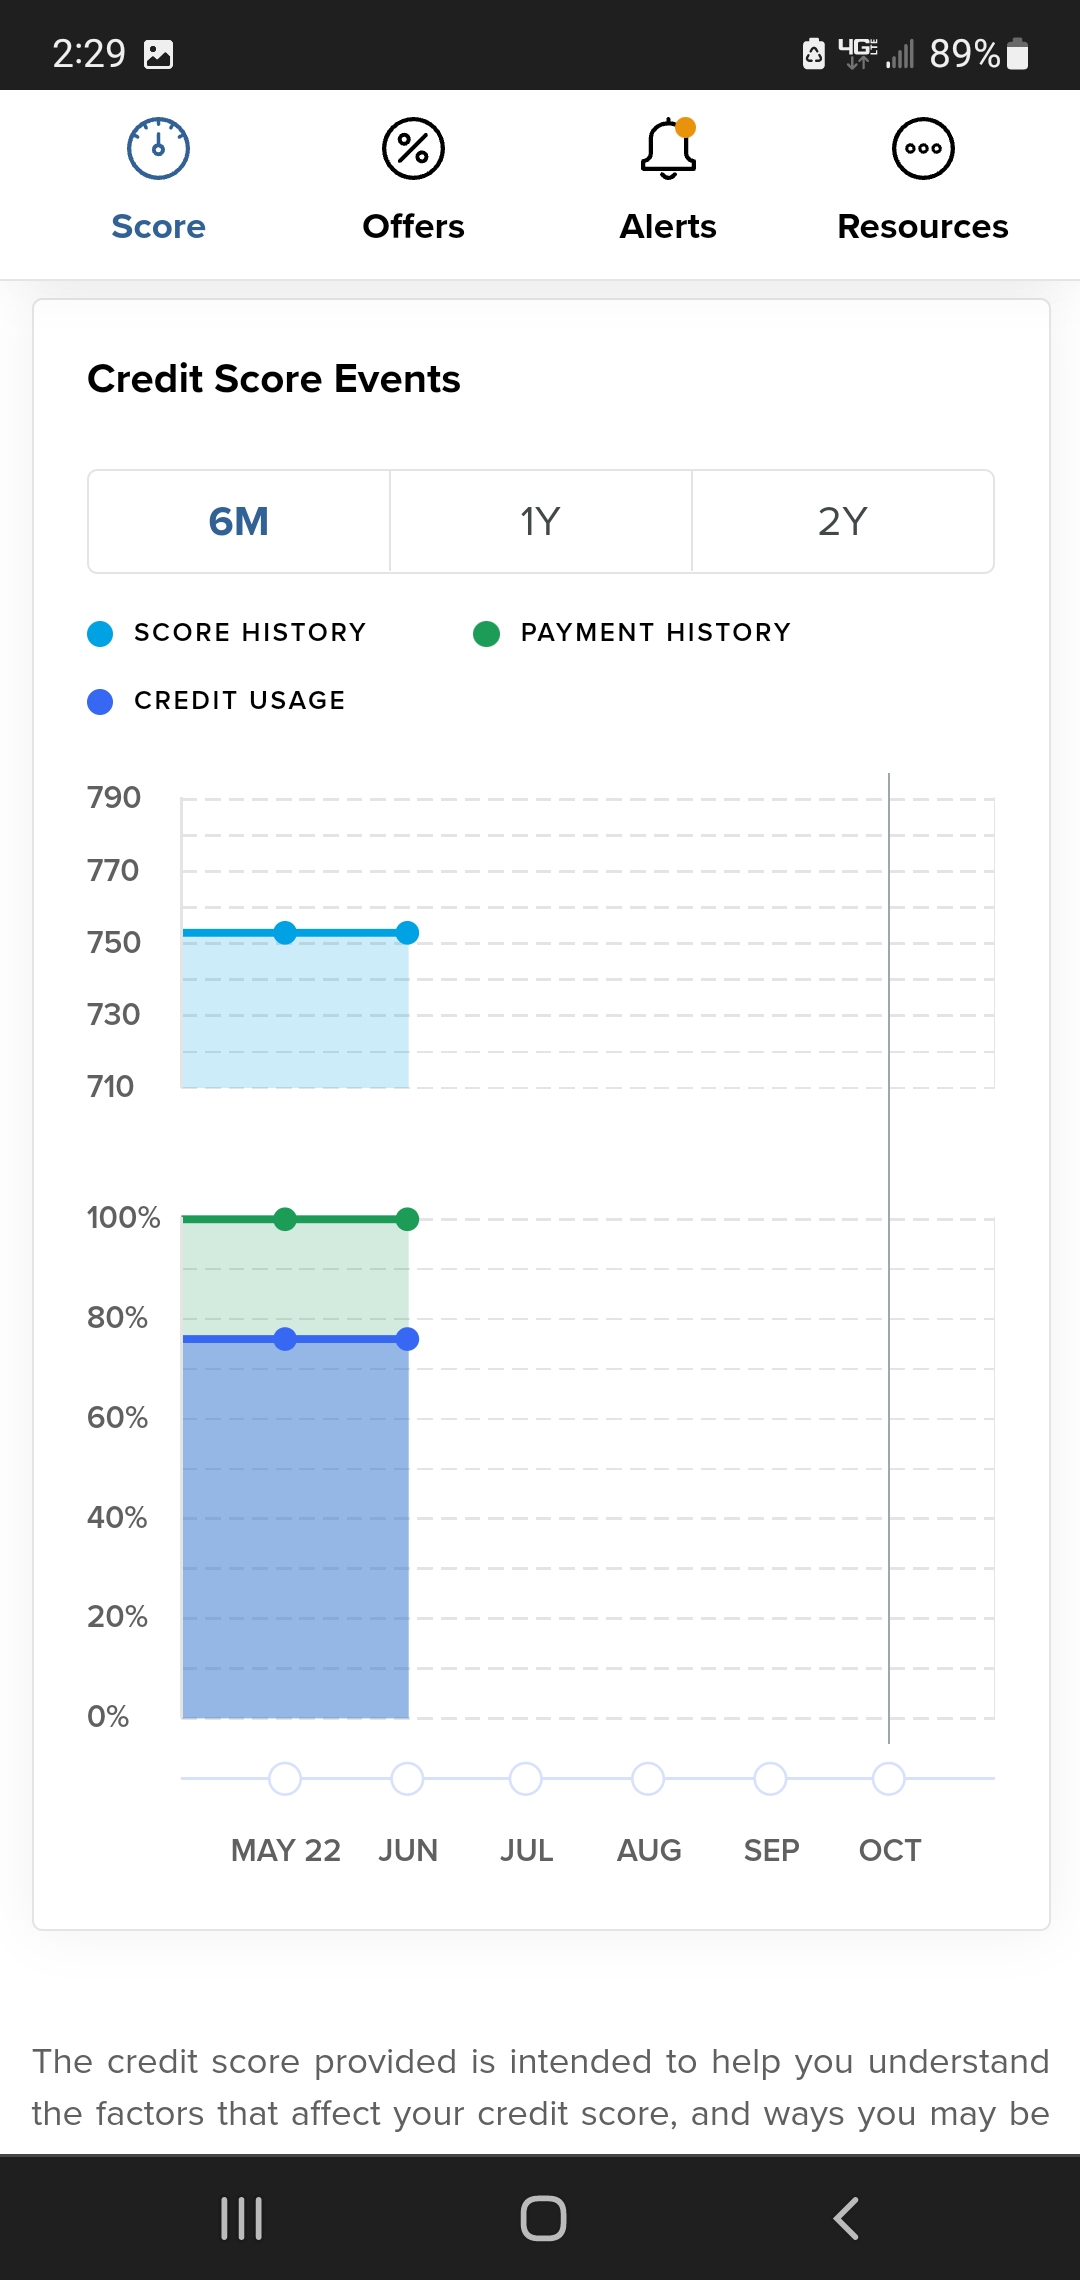 Visualize Credit Score Events Over Time